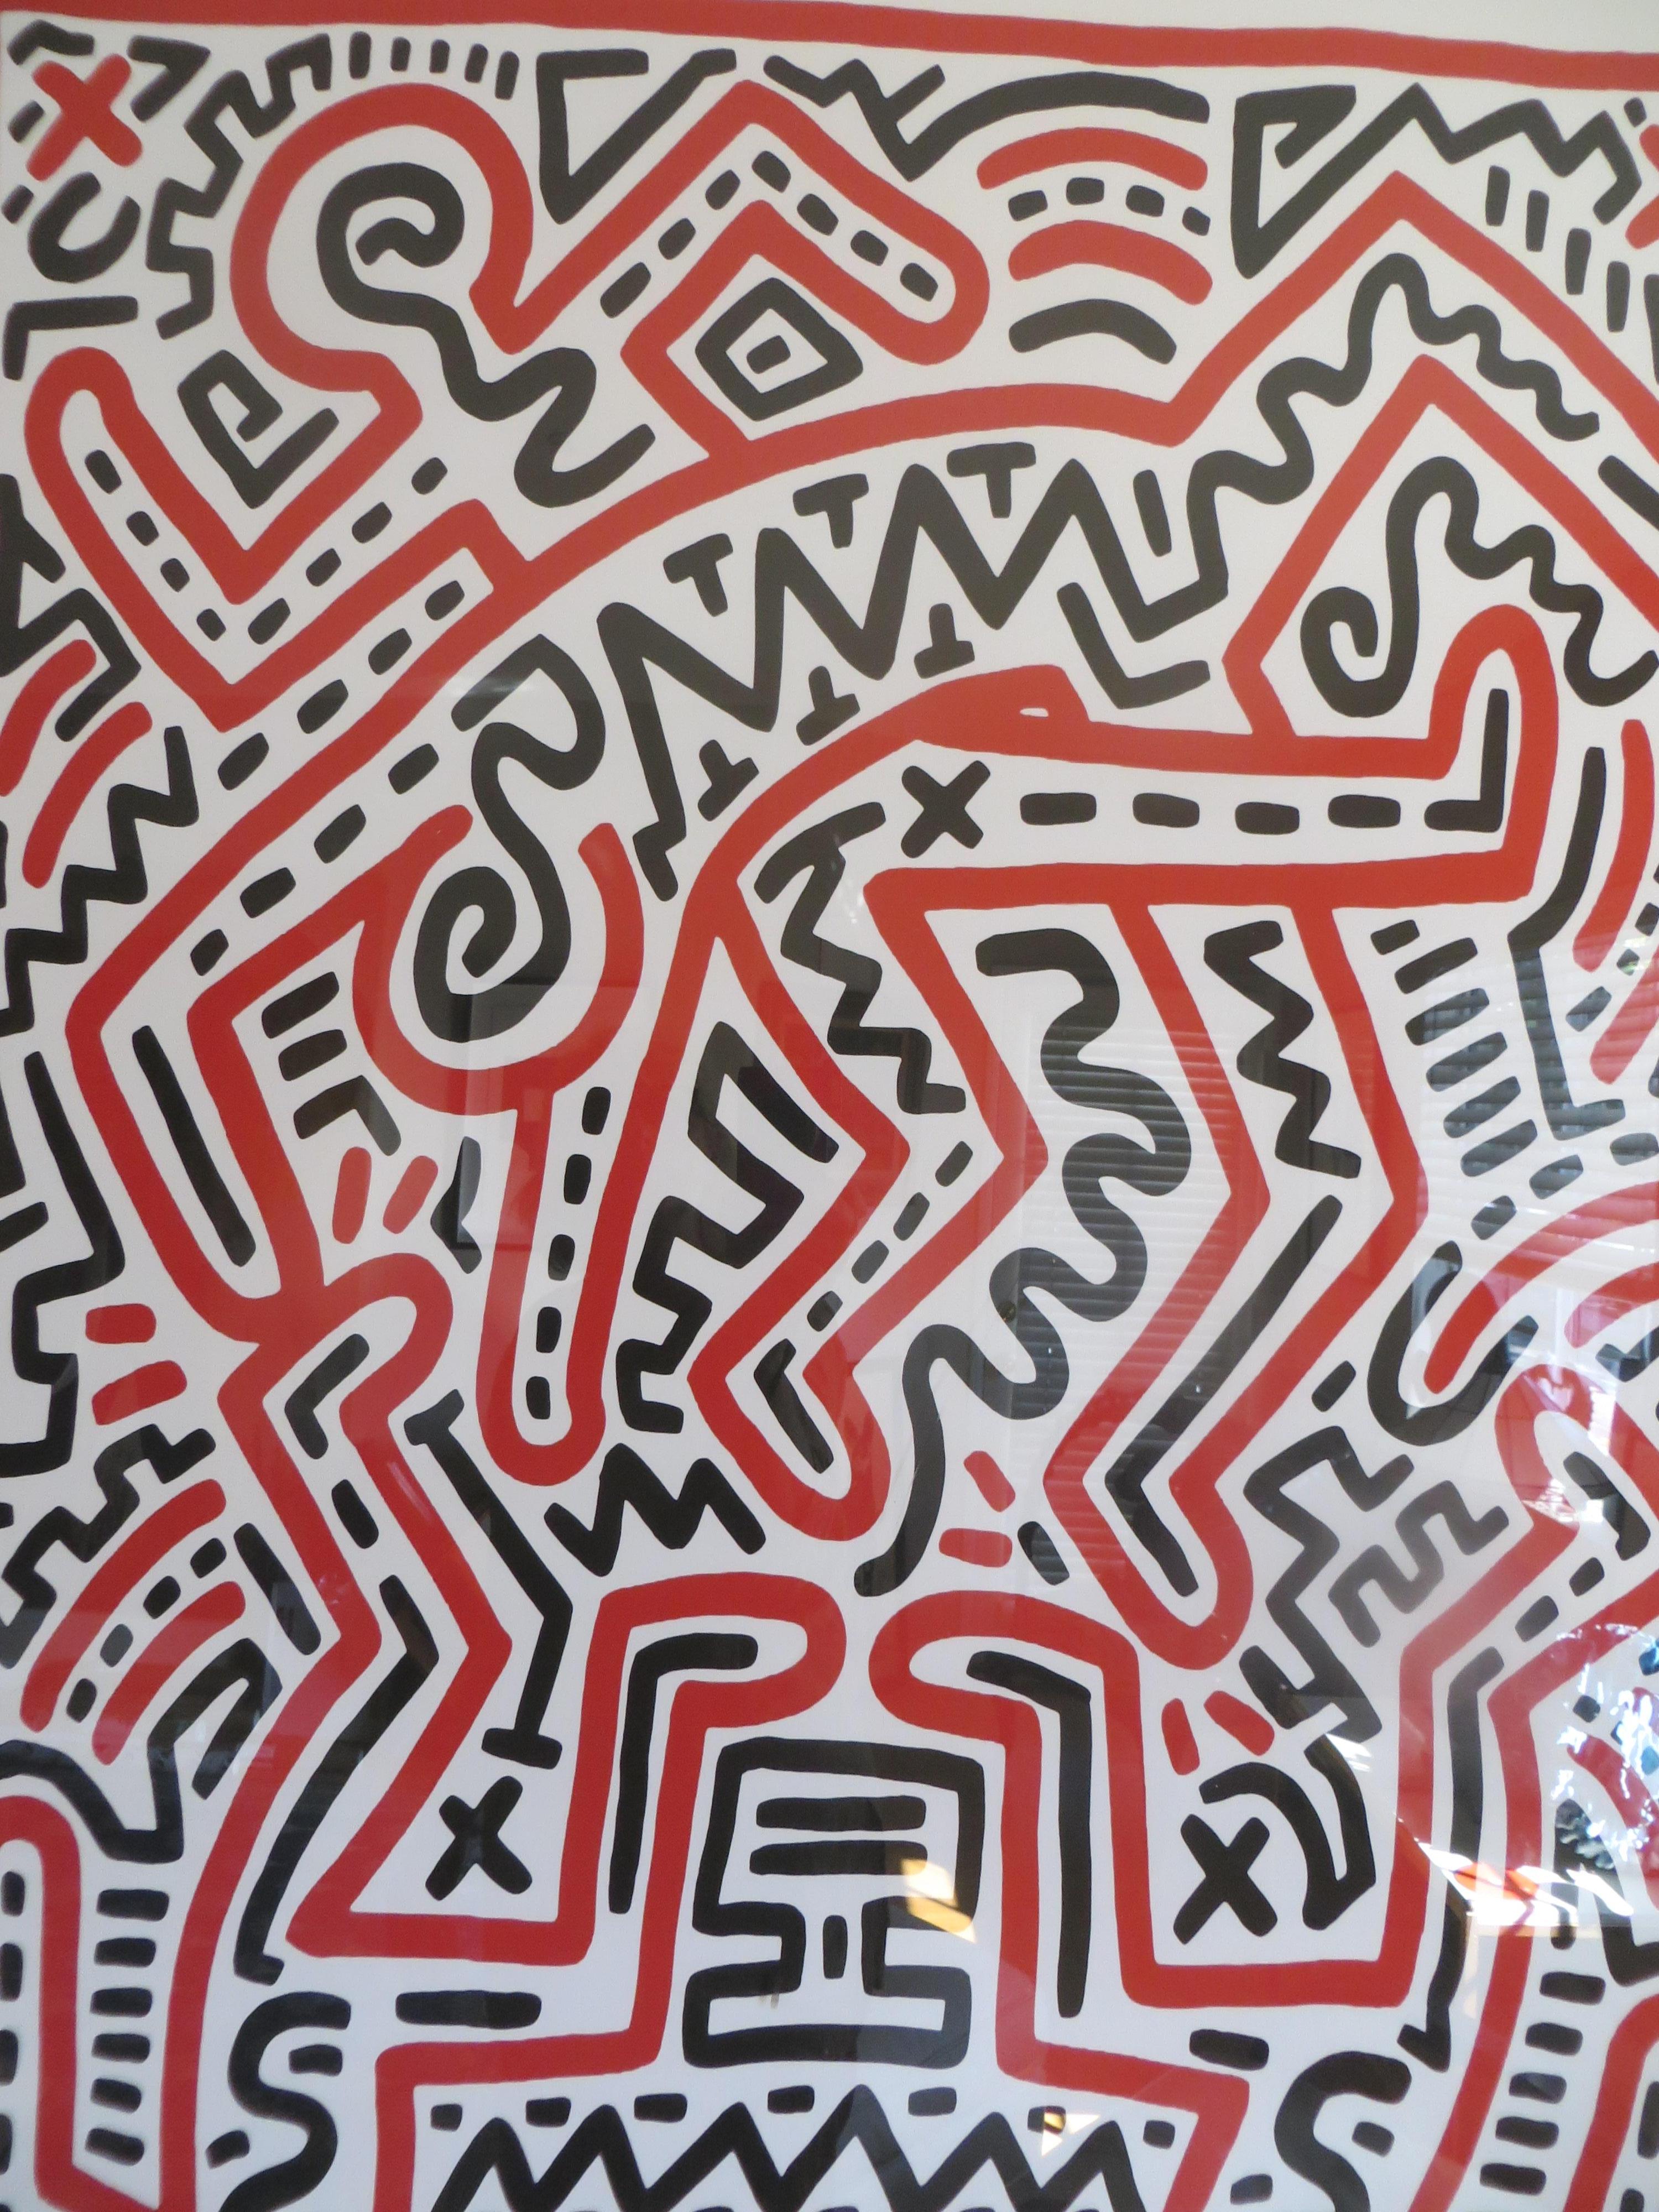 Fun Gallery Exhibition 1983  by Keith Haring Screen Print  3